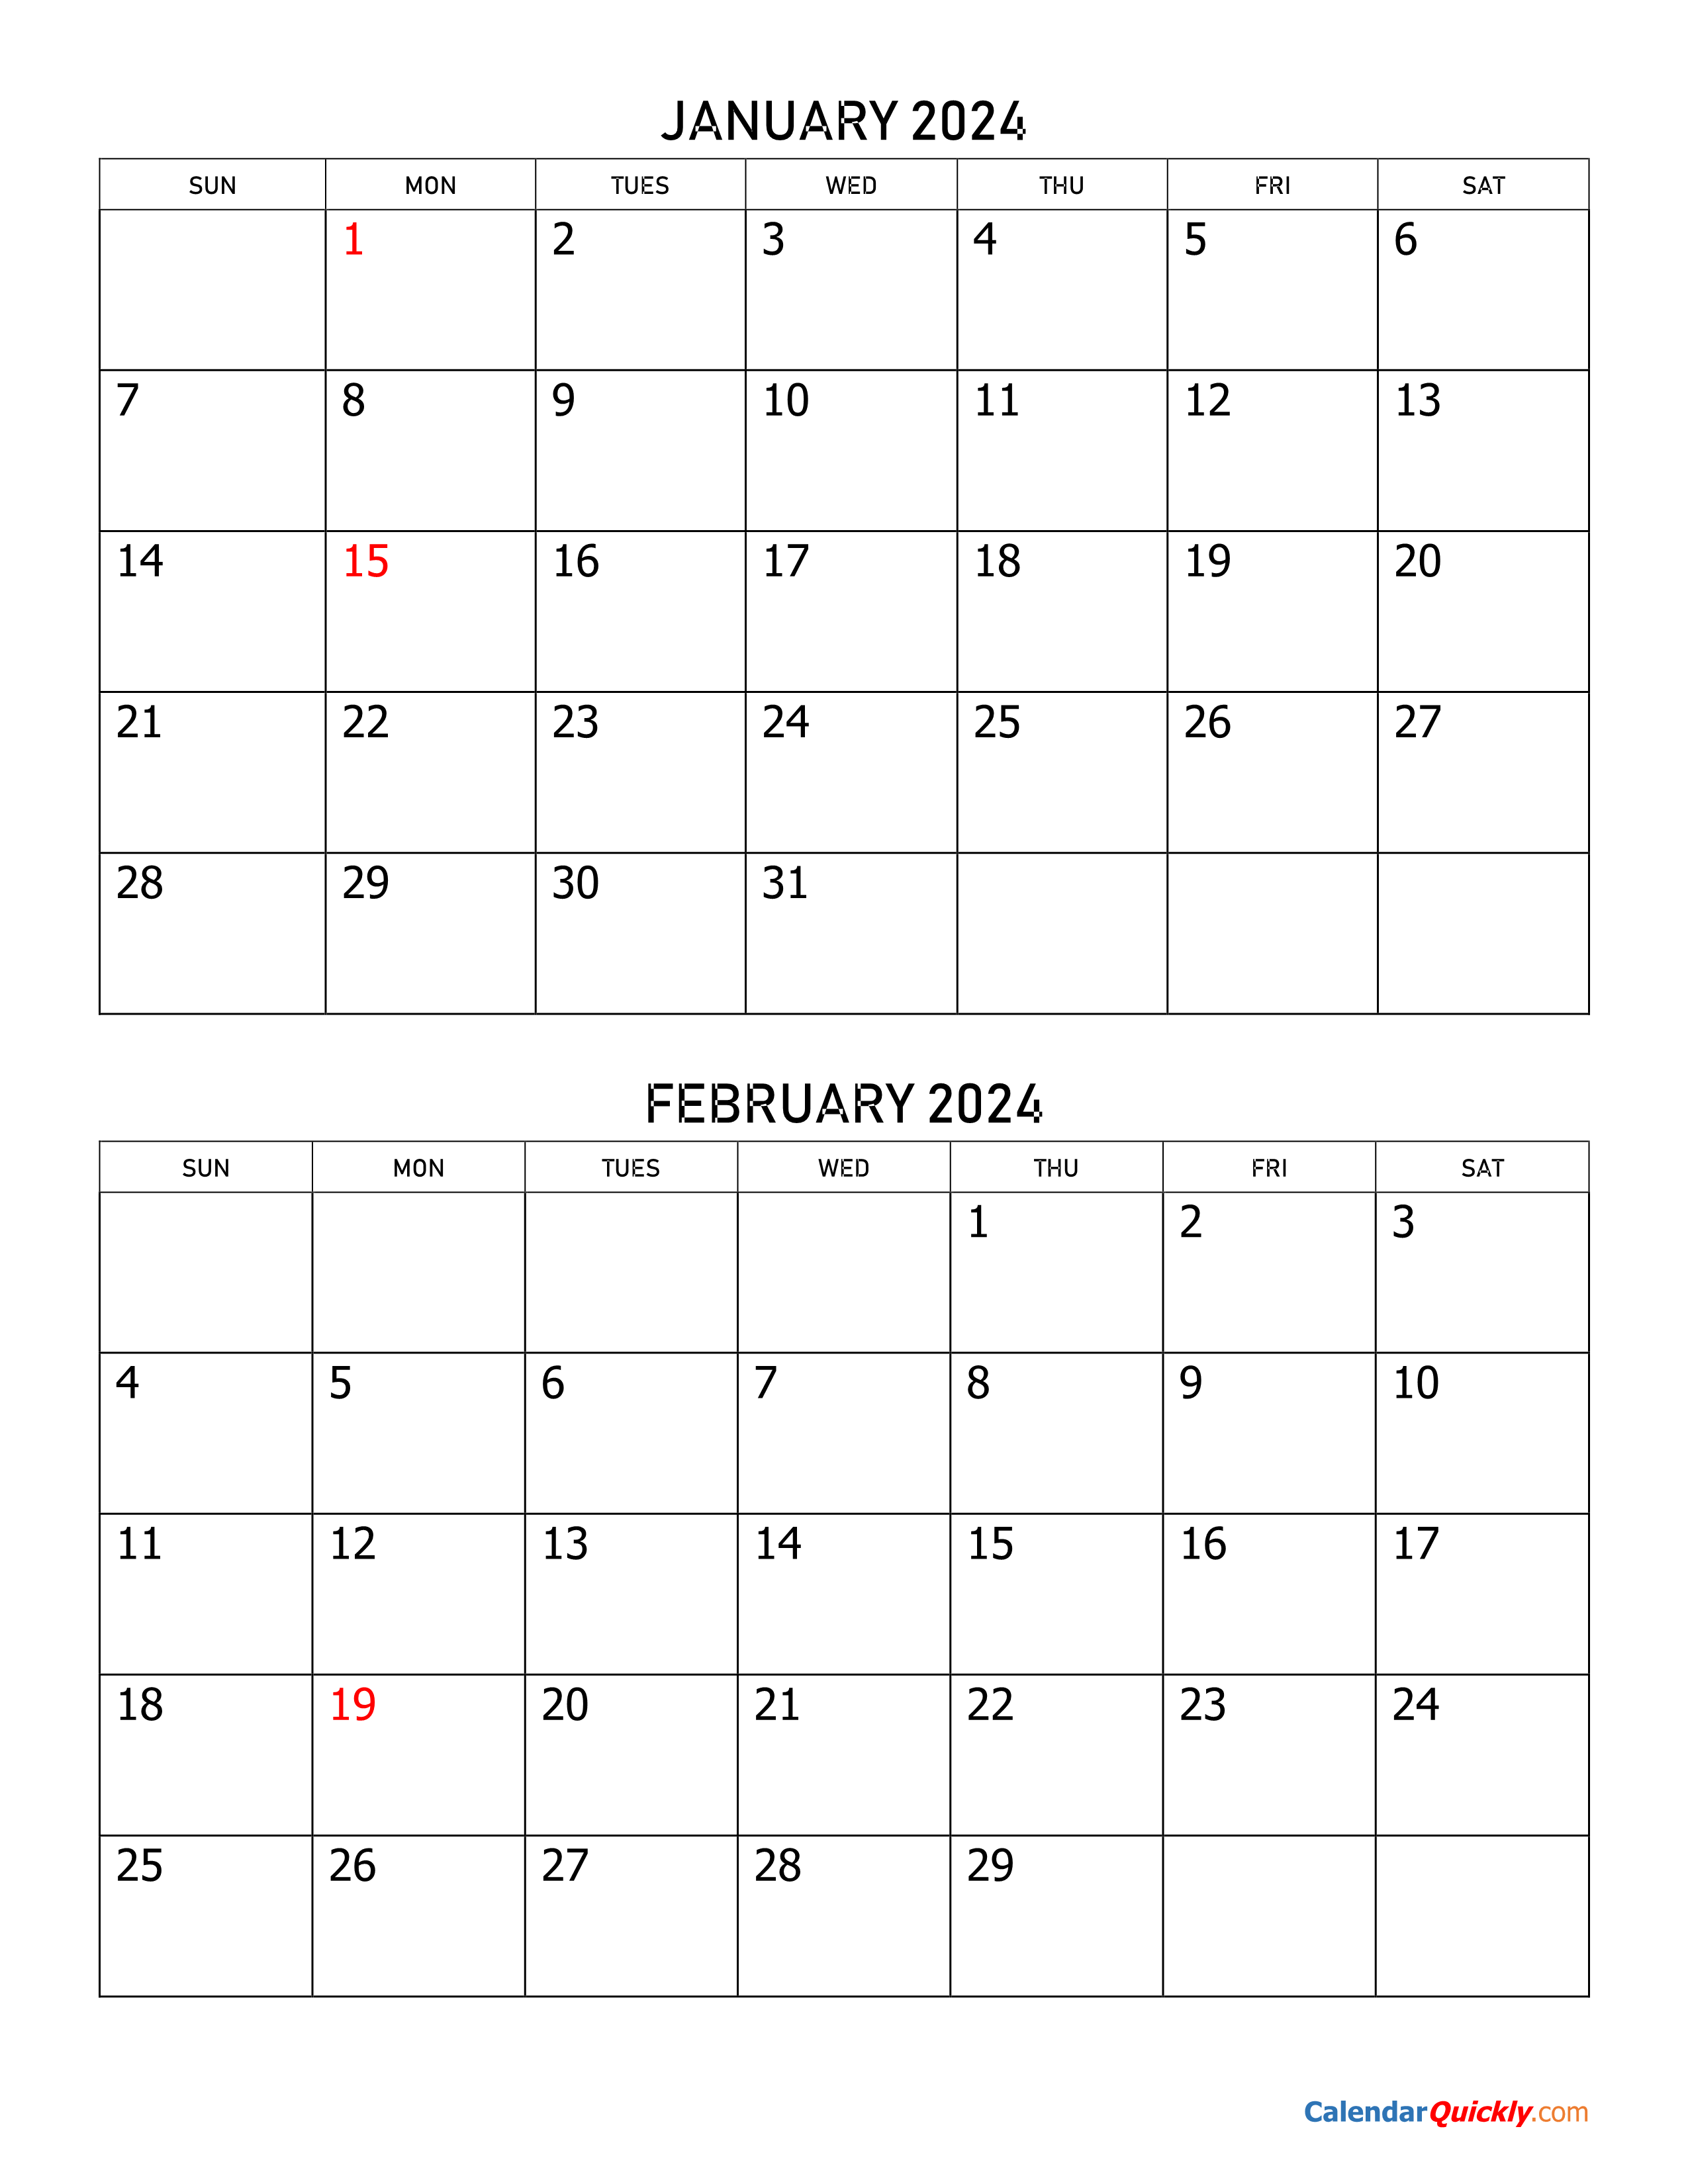 Two Months 2024 Calendar Calendar Quickly - Free Printable 2024 Calendar 2months In Page With Holidays